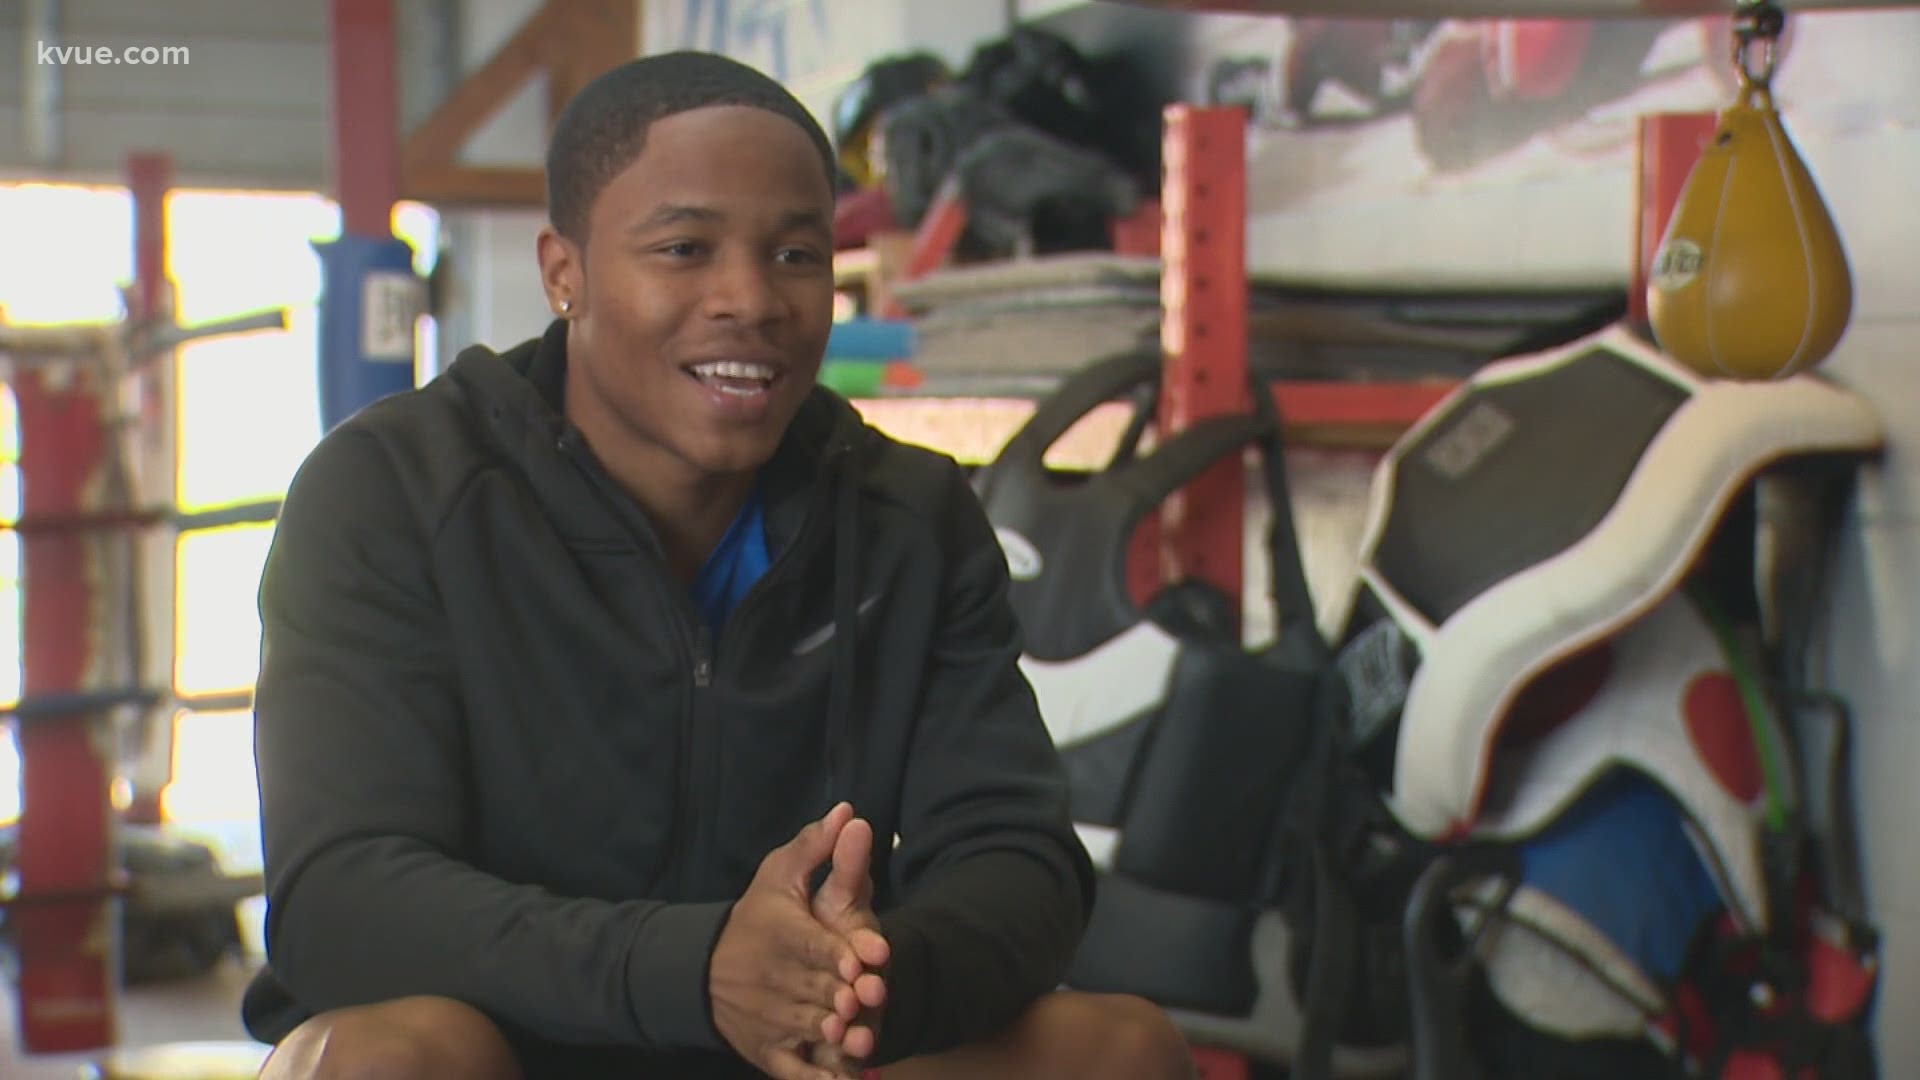 Floyd "Kid Austin" Schofield Jr. is a third-generation boxer. He wants to be the next world champion from Central Texas.